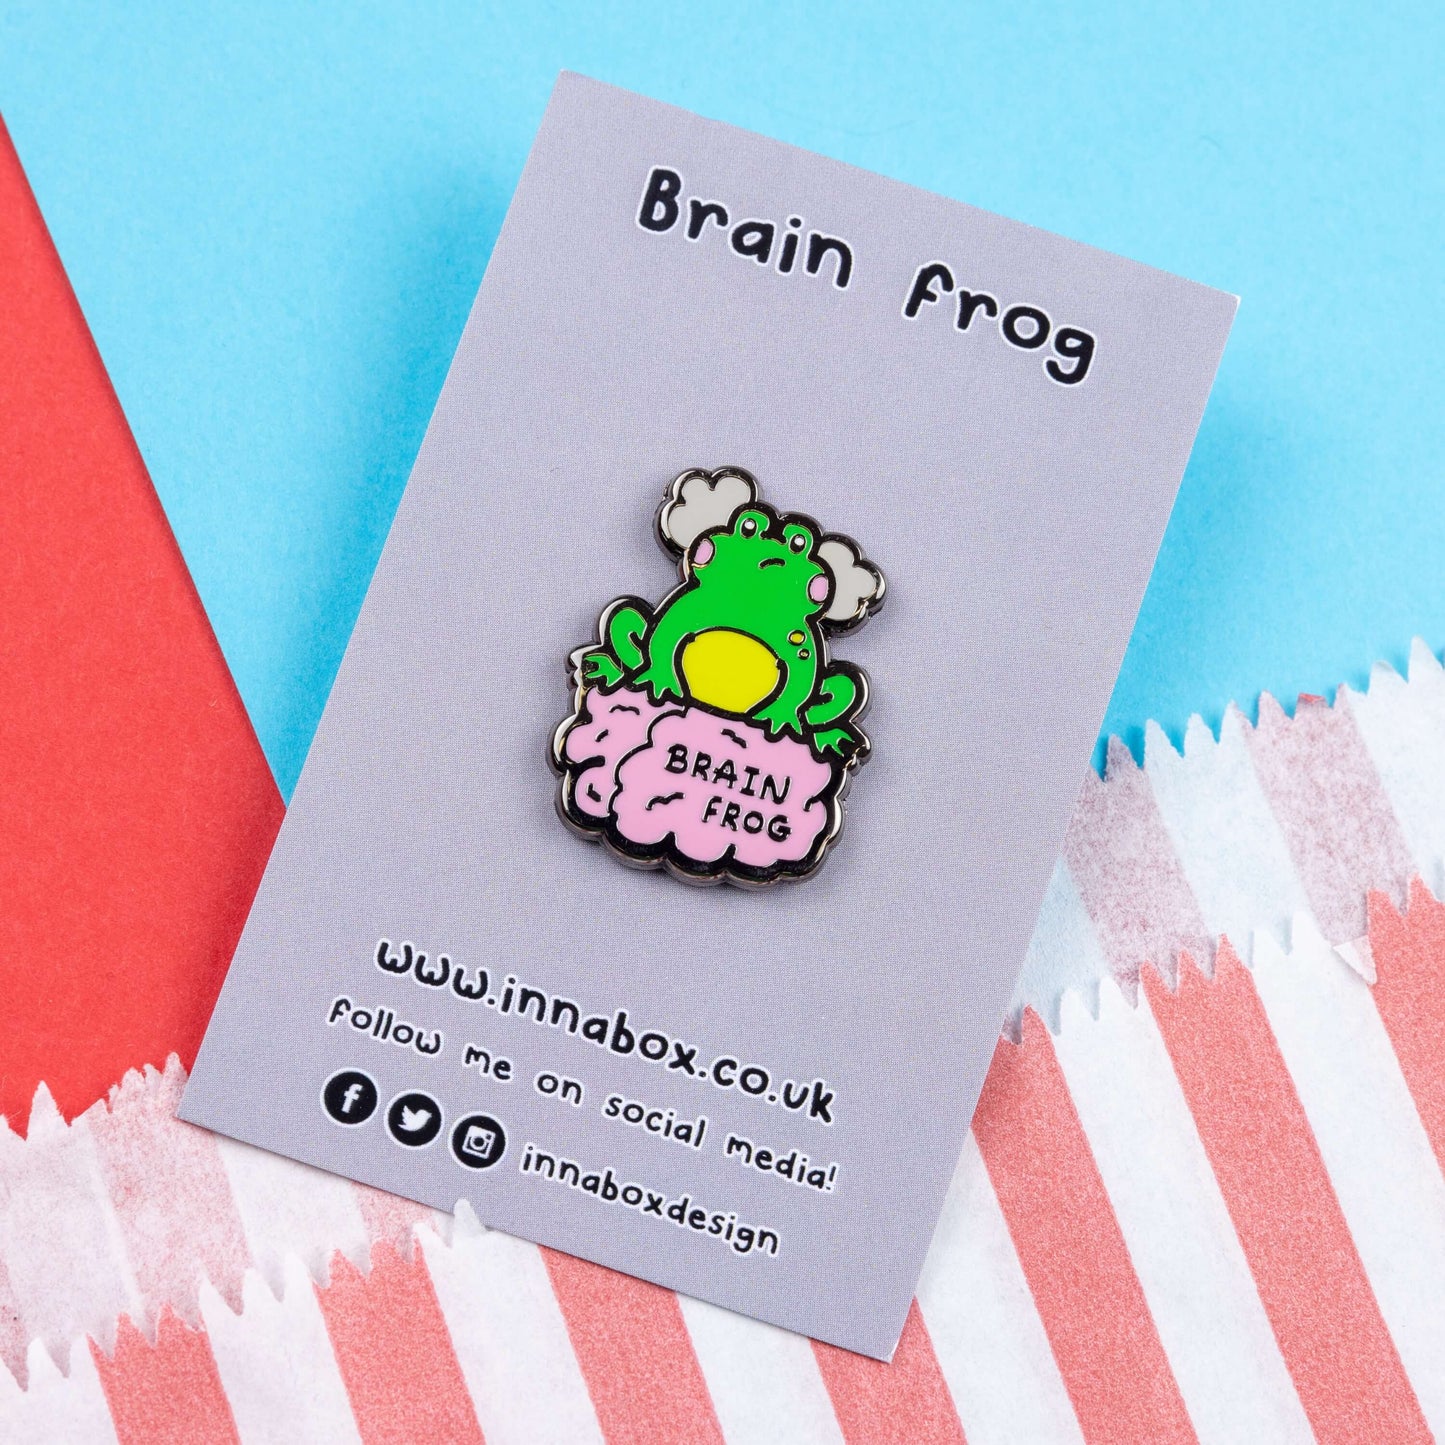 The Brain Frog Enamel Pin - Brain Fog on its grey backing card laid on a blue and red card background. The pin is of a green frog with pink blush cheeks looking confused with two grey clouds by its head, it is sat on a pink brain with the text reading Brain Frog. The design is raising awareness for brain fog.